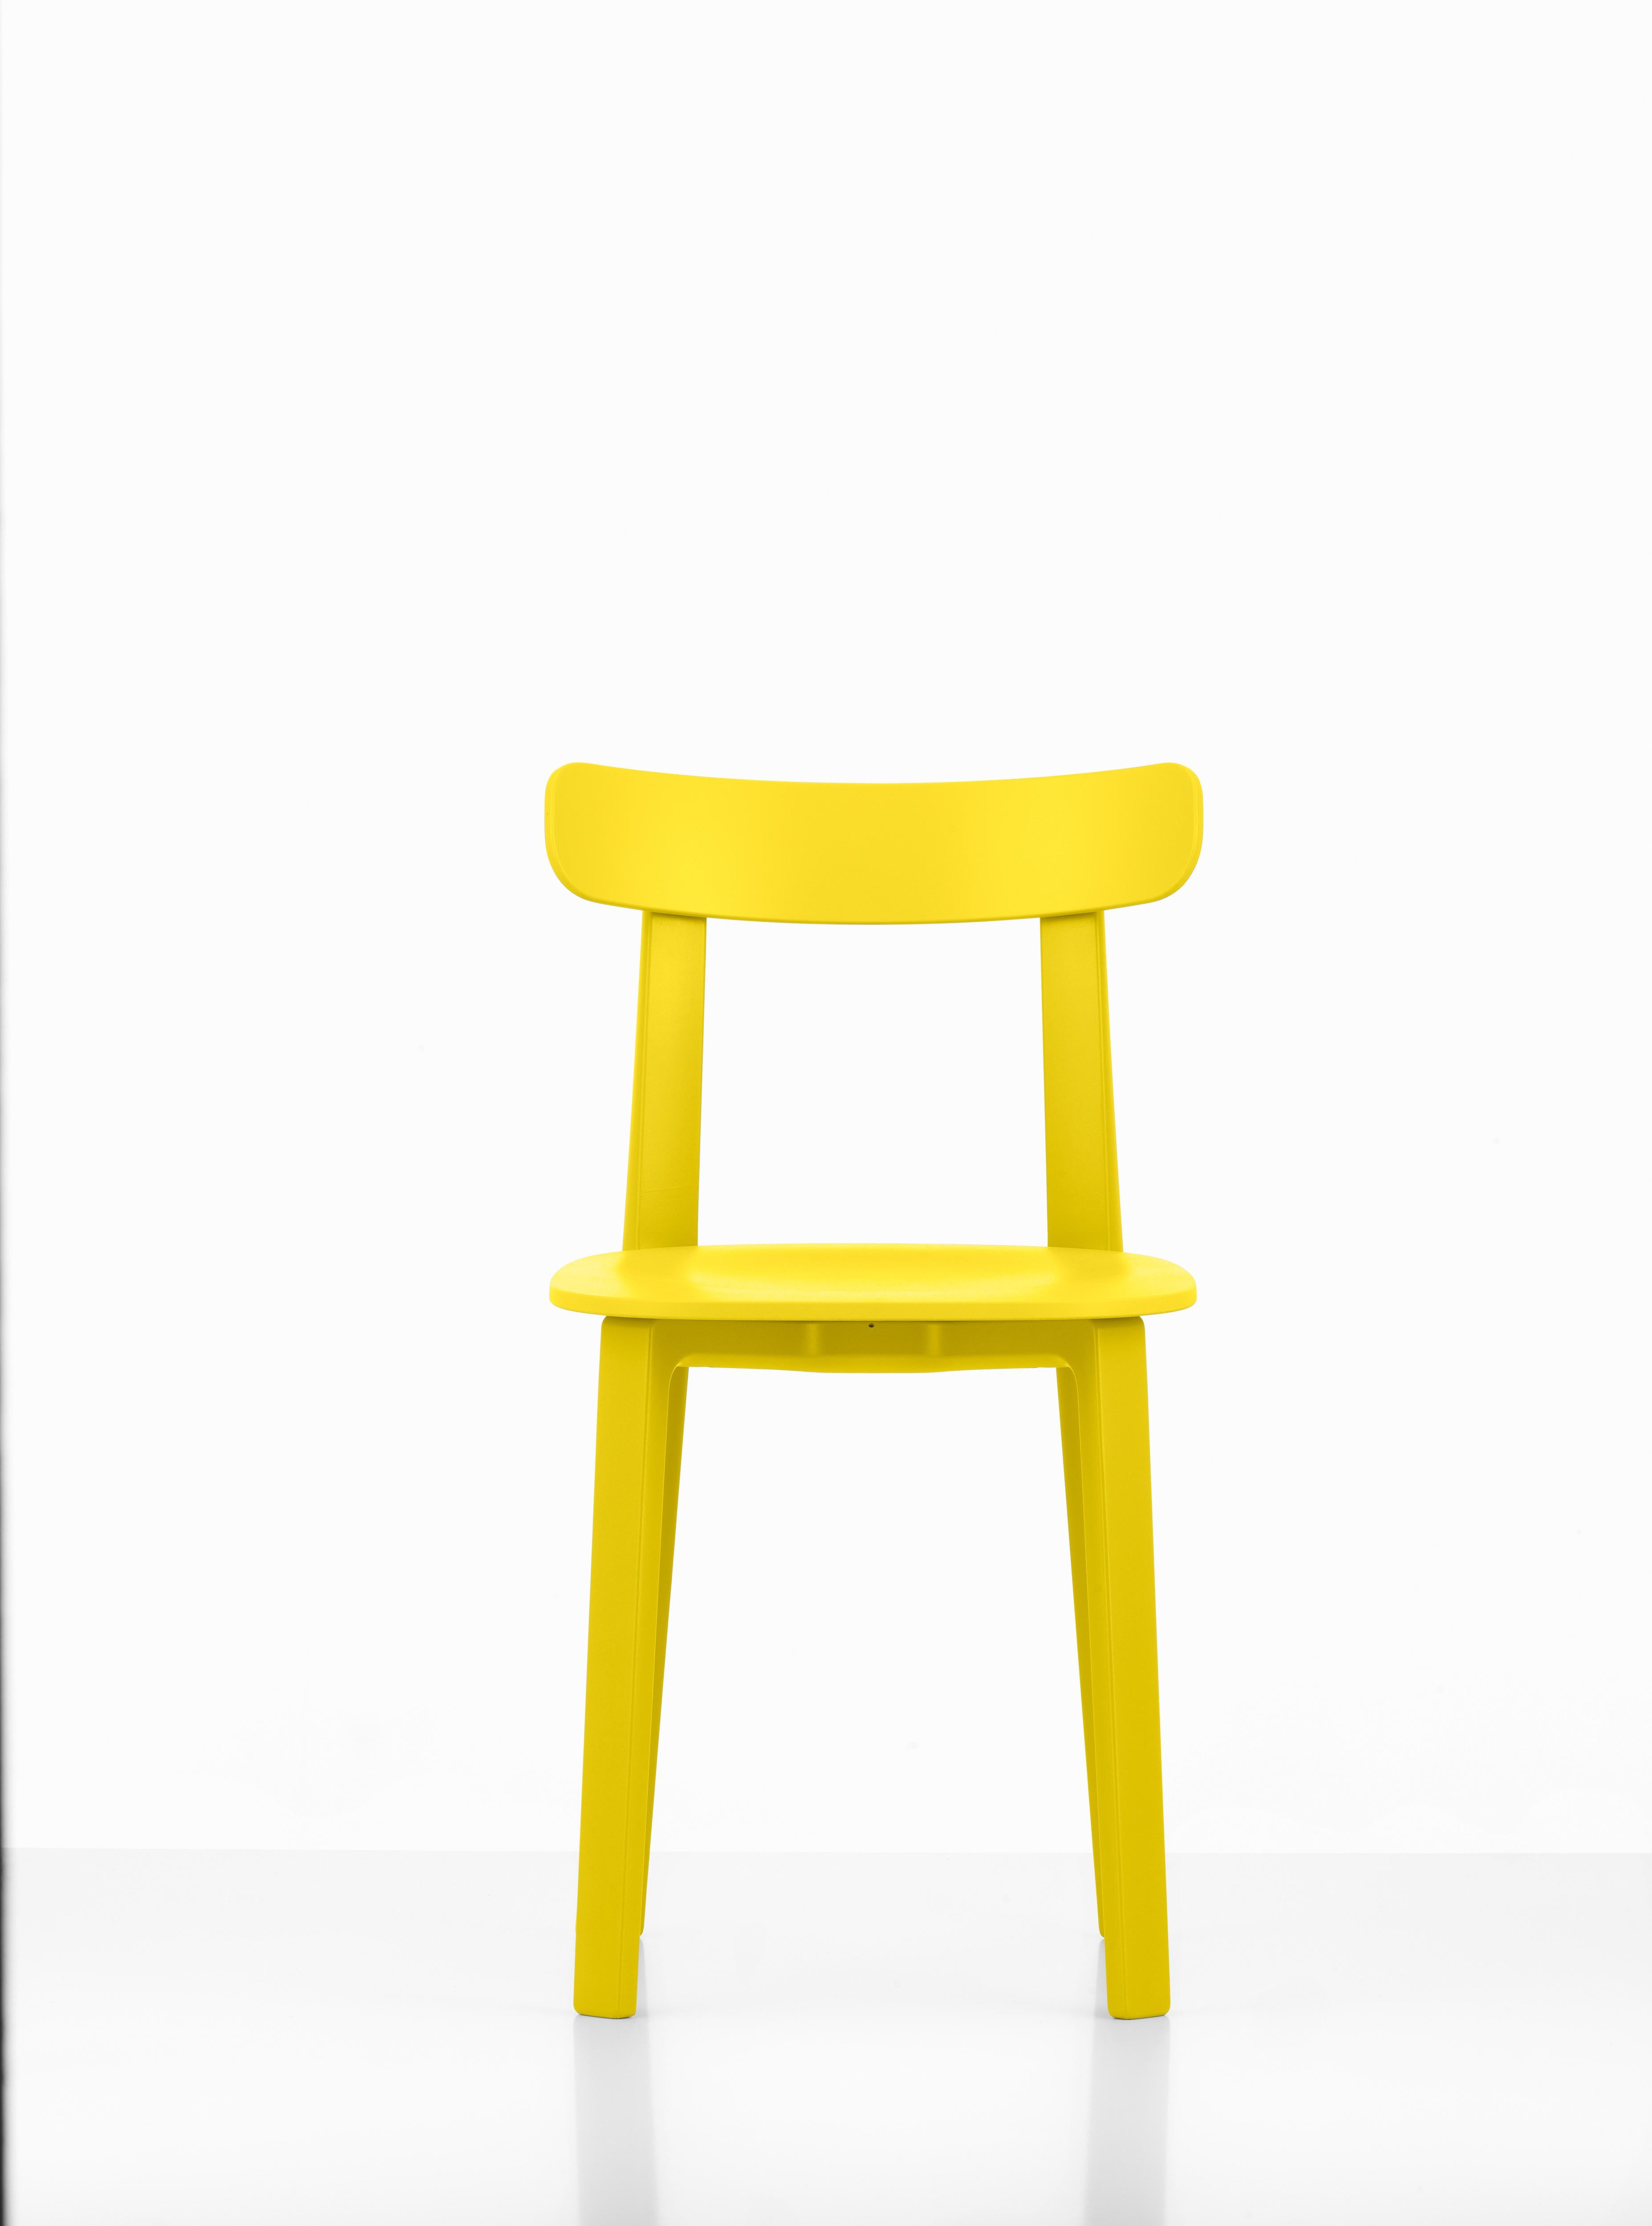 These products are only available in the United States.

At first glance, the All Plastic Chair is reminiscent of the simple, classic wooden chairs that have been familiar in Europe for many decades. Utilizing a new material, the chair represents a